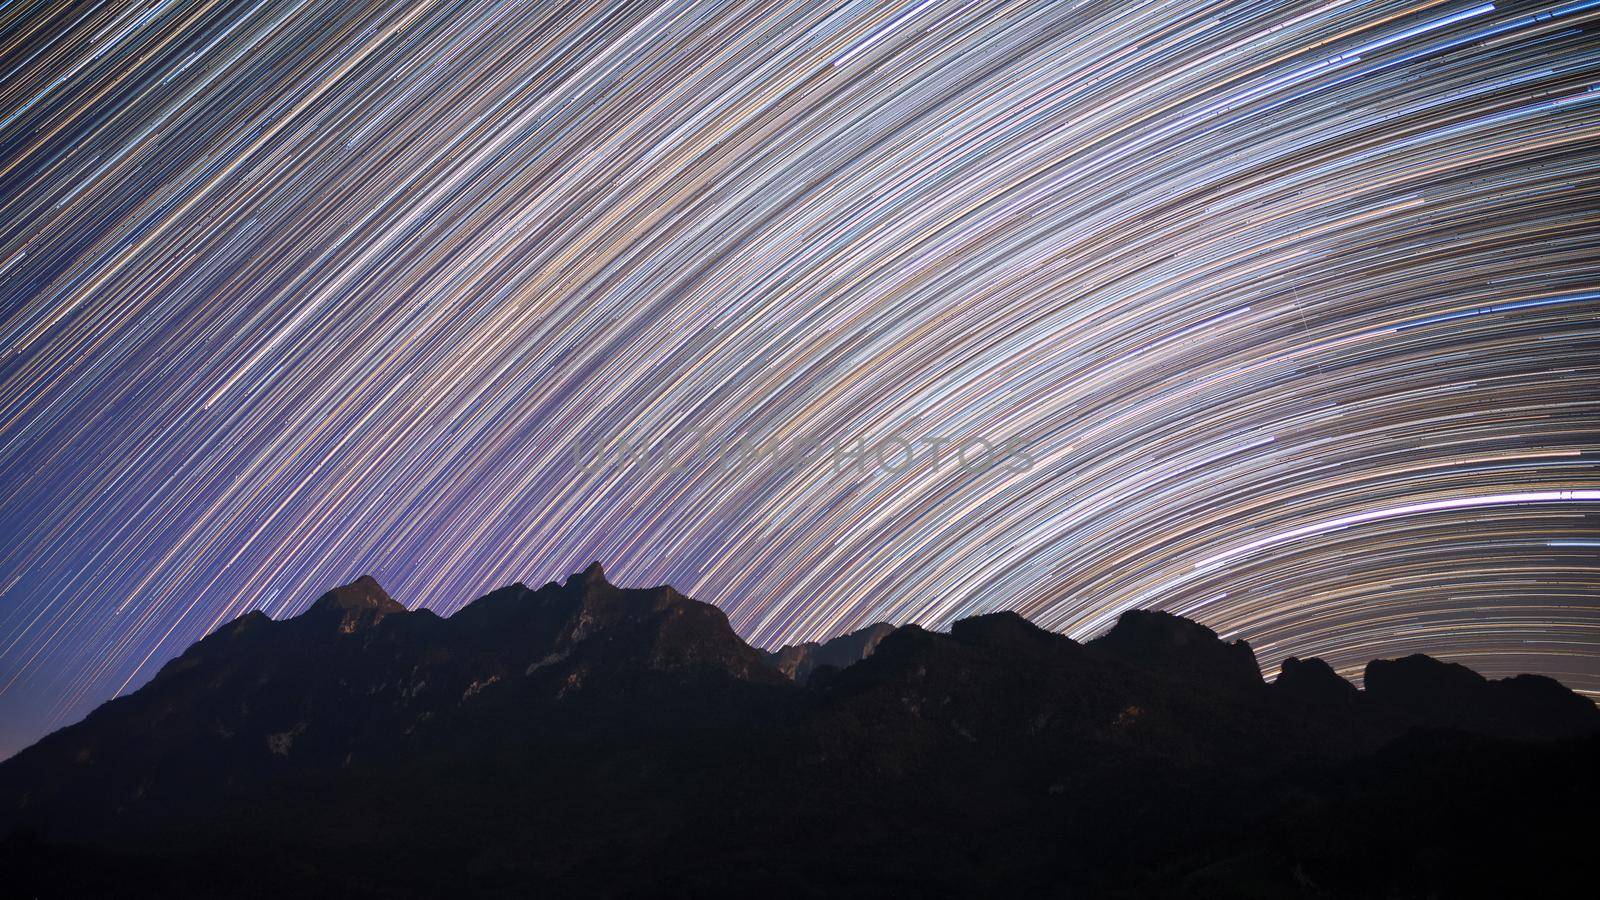 Star trails over Doi Luang Chiang Dao mountain at night, The famous mountain for tourist to visit in Chiang Mai,Thailand. by Nuamfolio